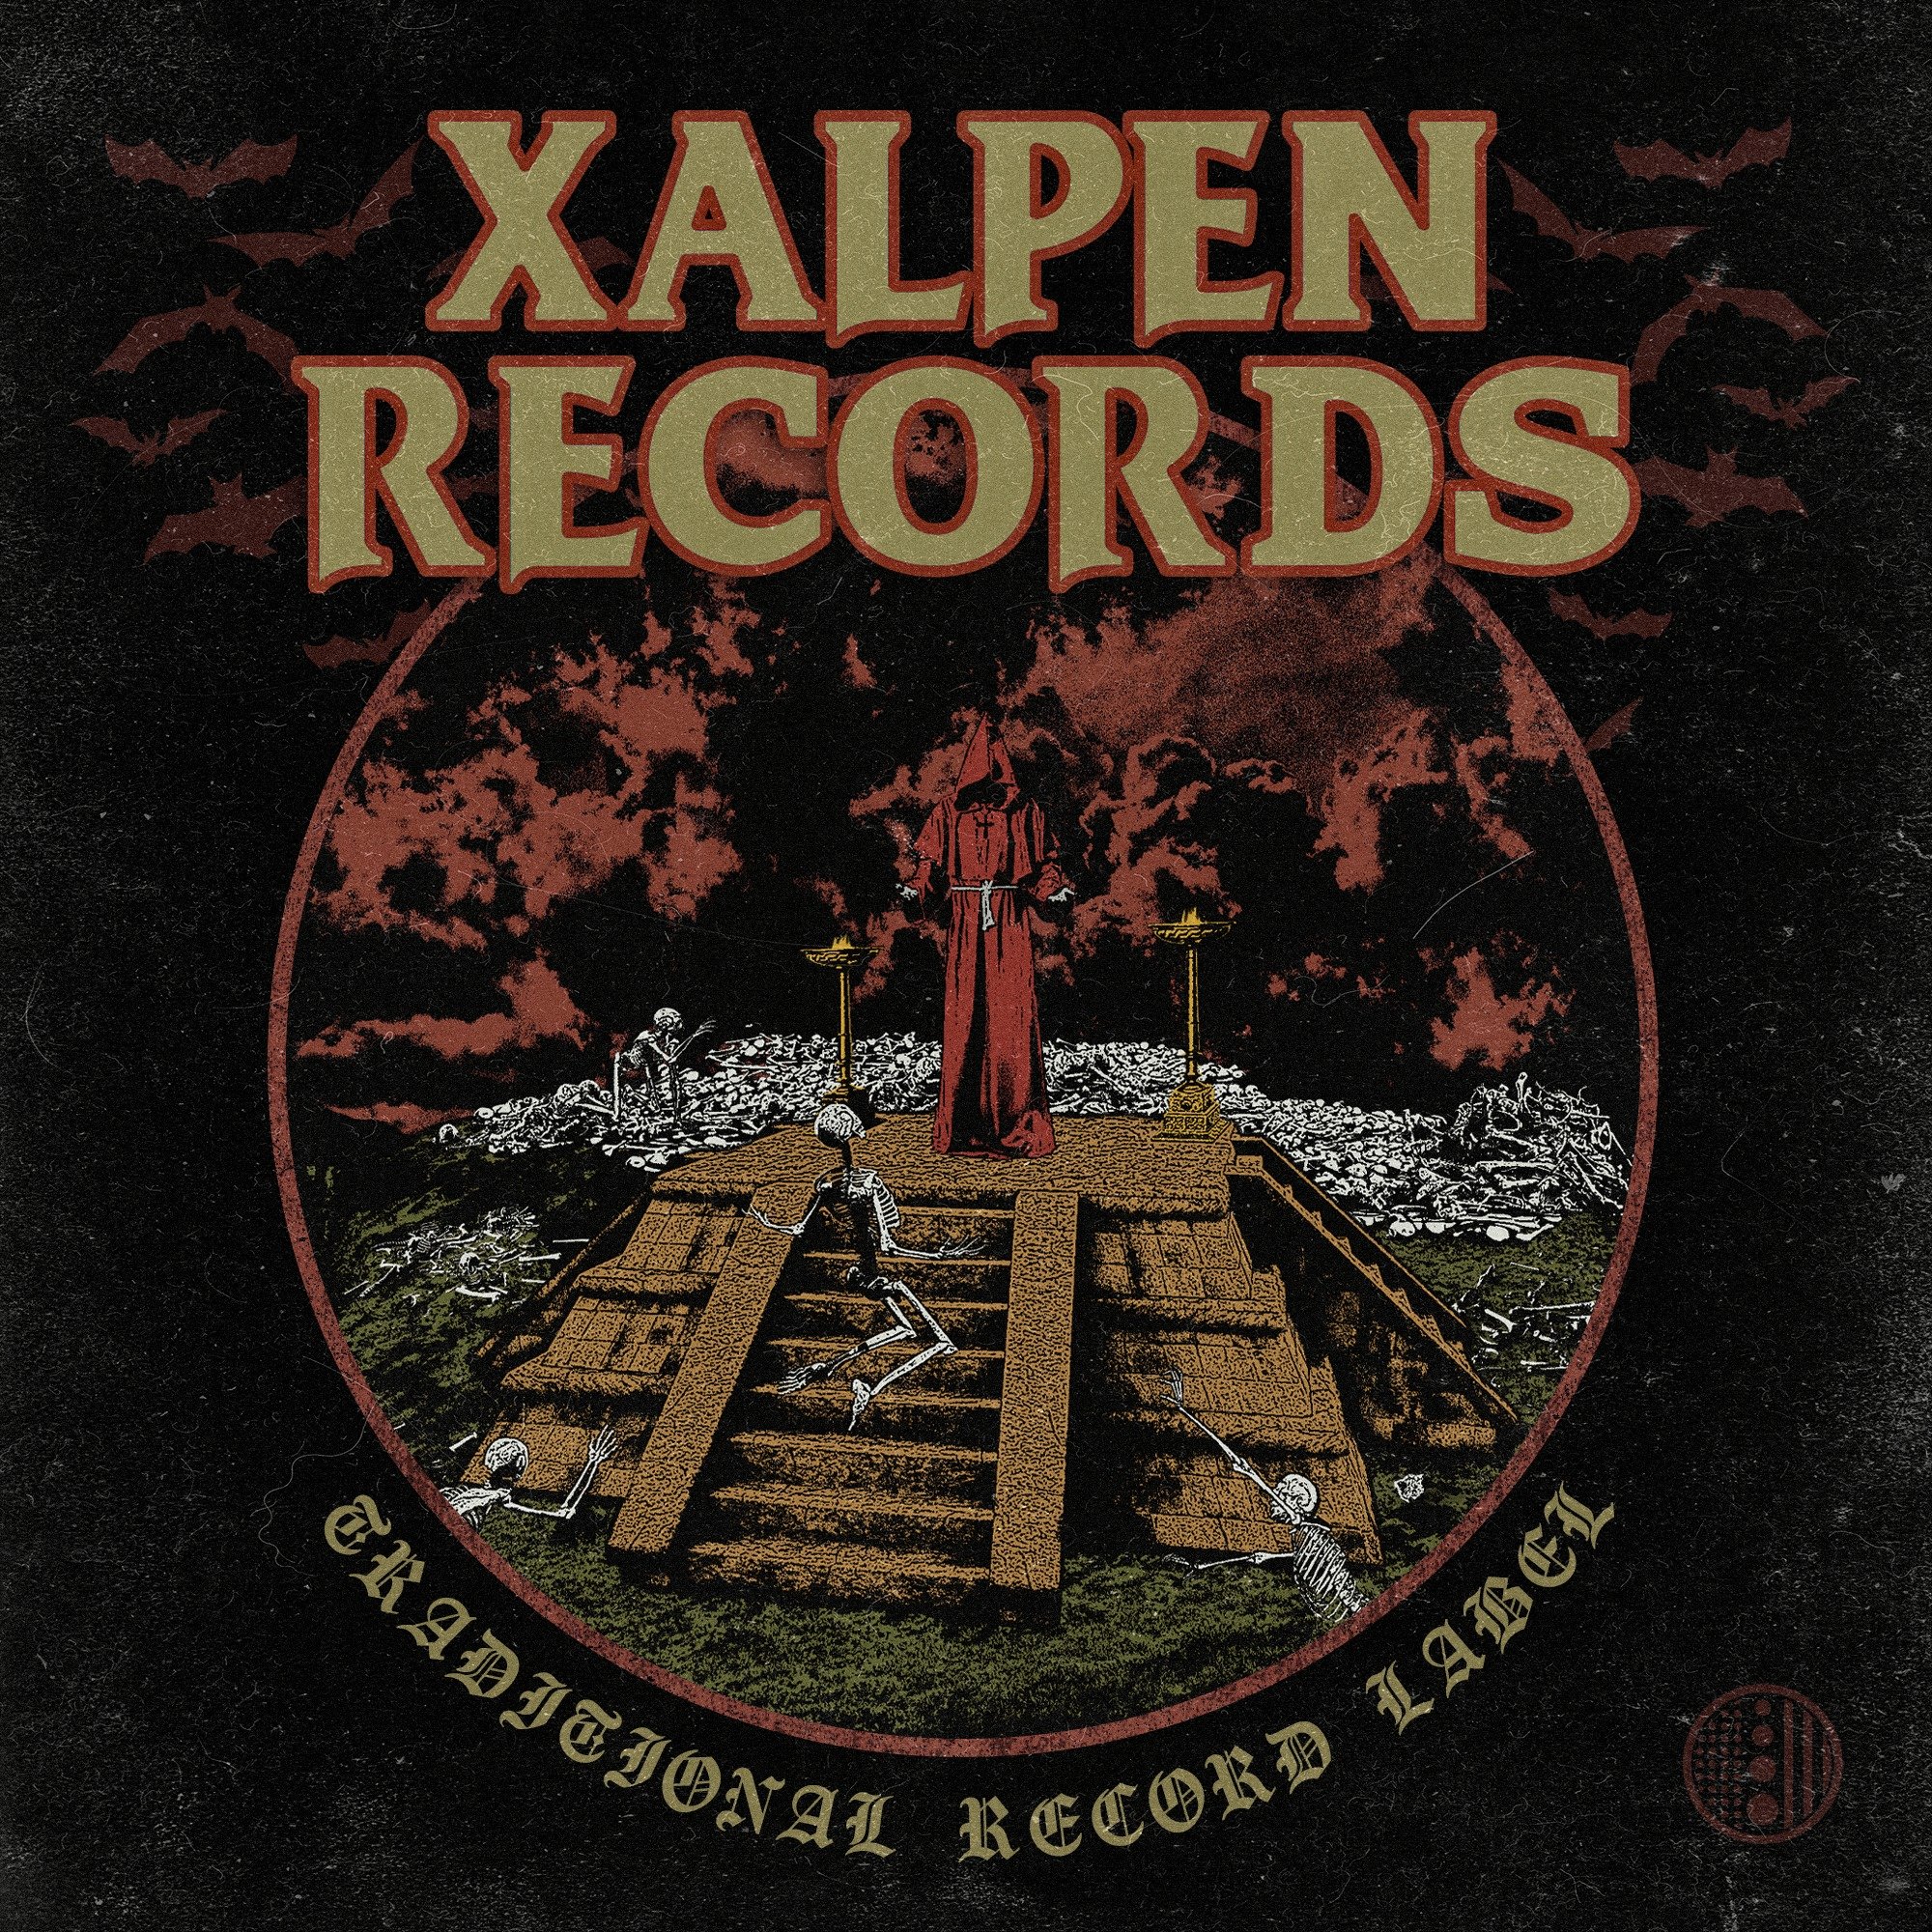 Interview with XALPEN RECORDS